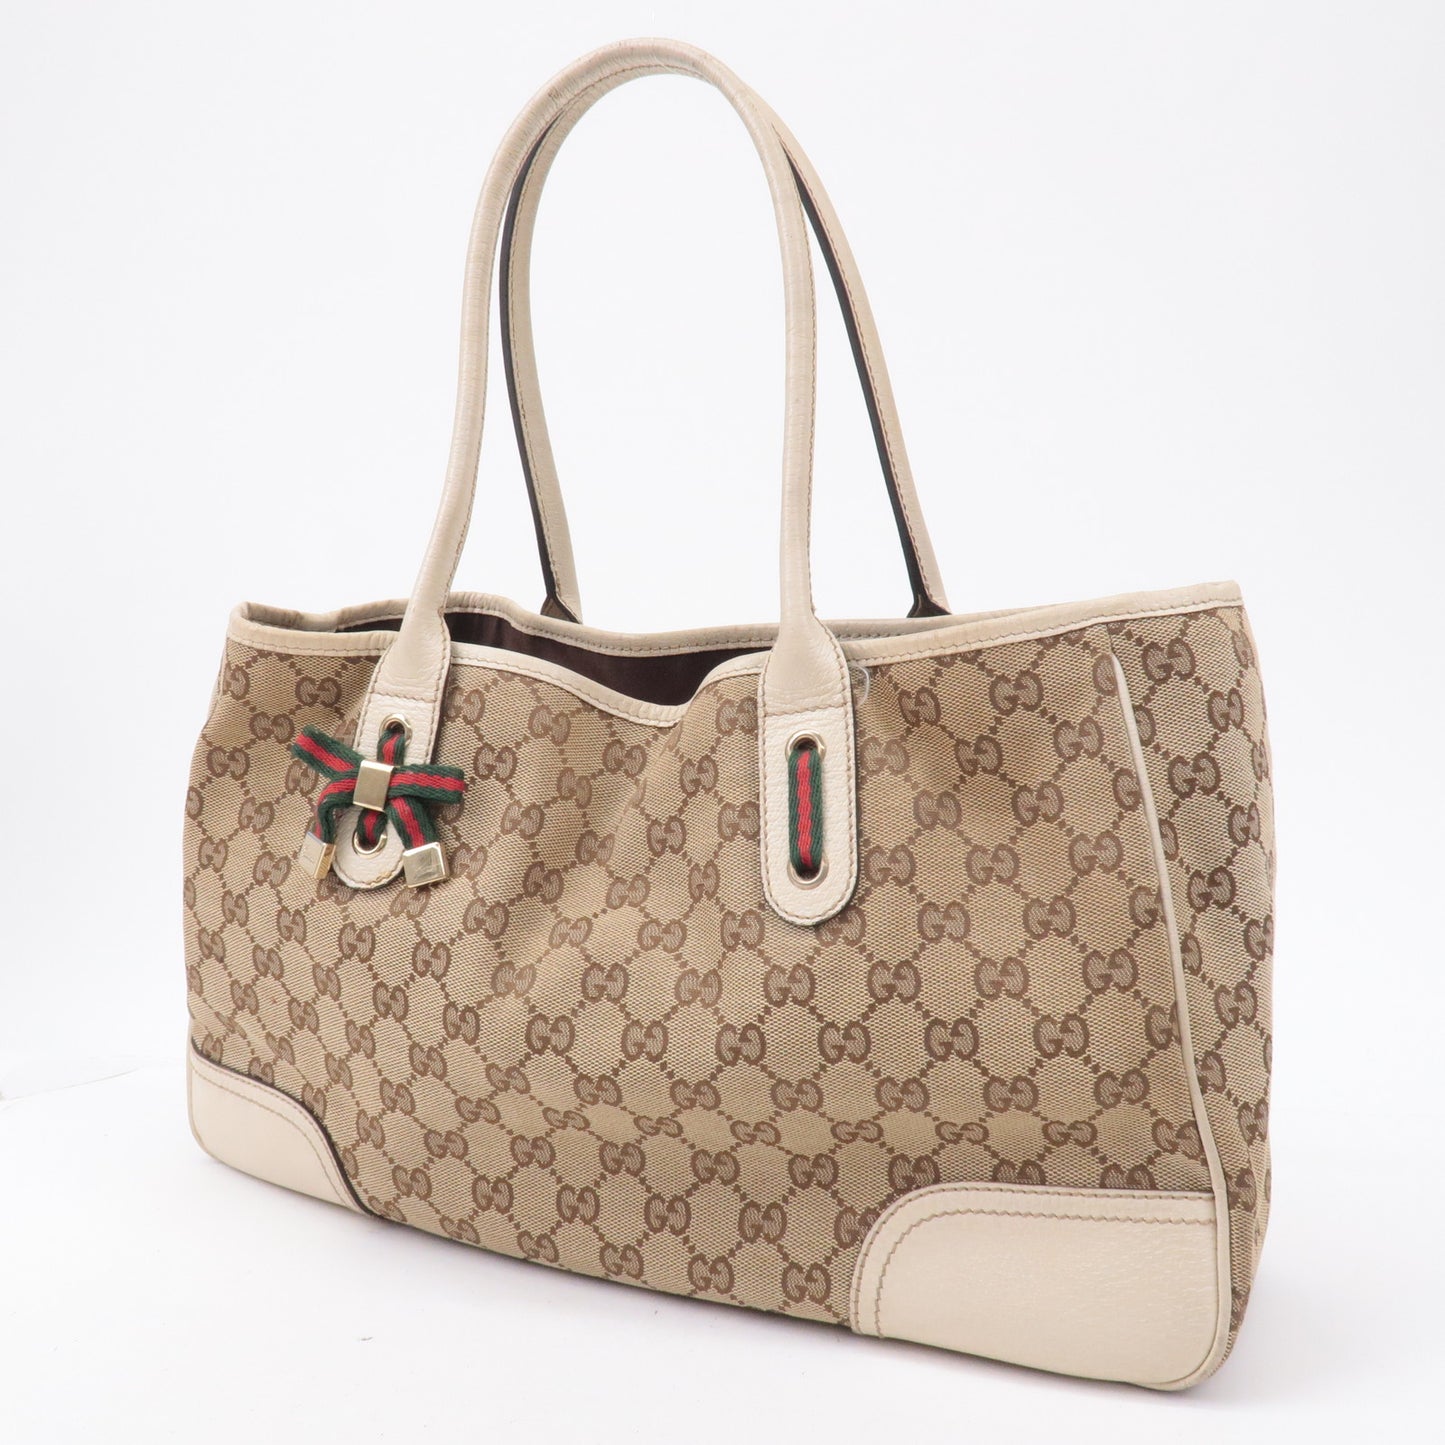 GUCCI Sherry Princy GG Canvas Leather Tote Bag Beige Ivory 163805